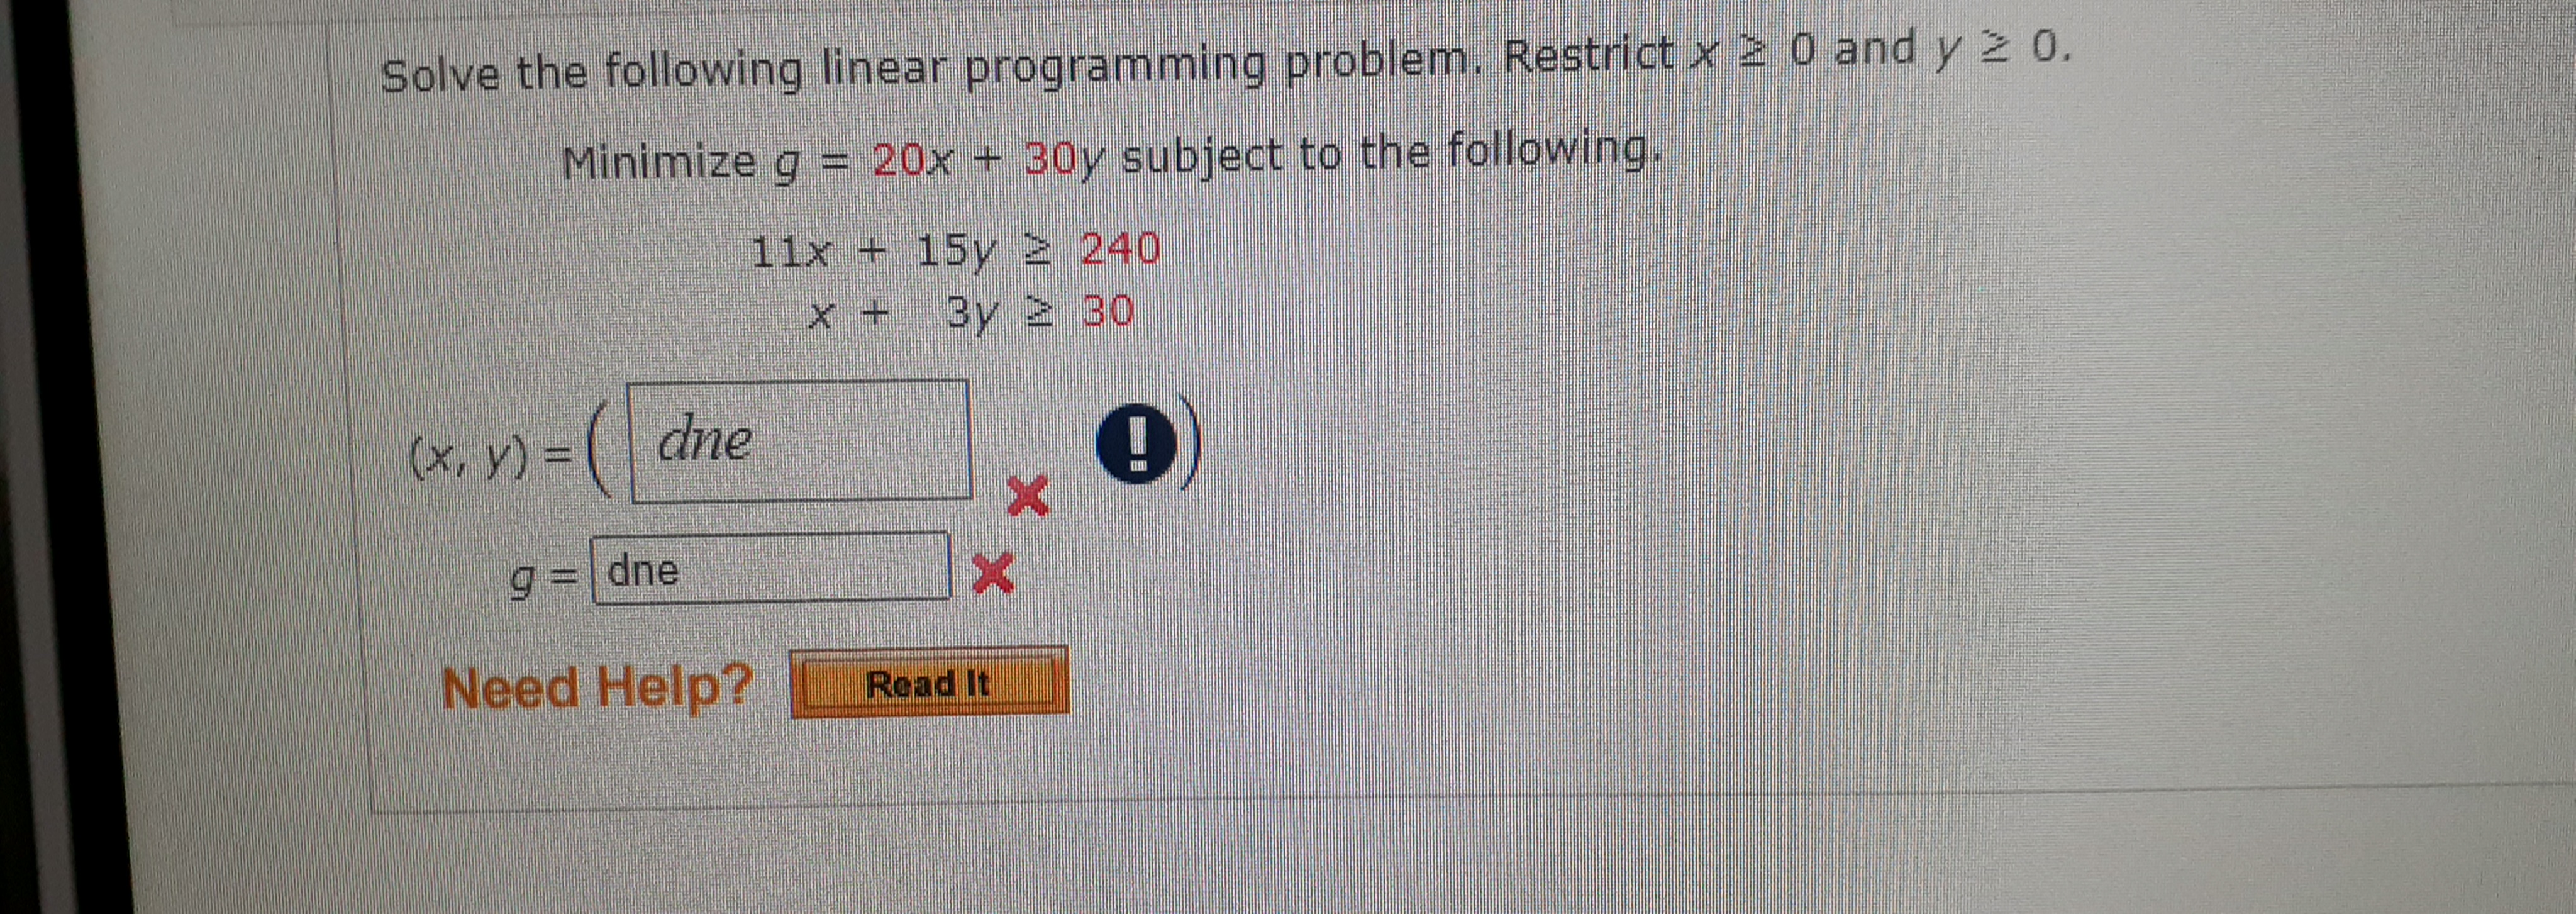 Solve the following linear programming problem. Restrict x 20 and y 2 0.
Minimize g = 20x + 30y subject to the following.
11x + 15y 2 240
x + 3y 230
=(₁
9= dne
X
Need Help? Read It
(x, y) =
dne
X
!